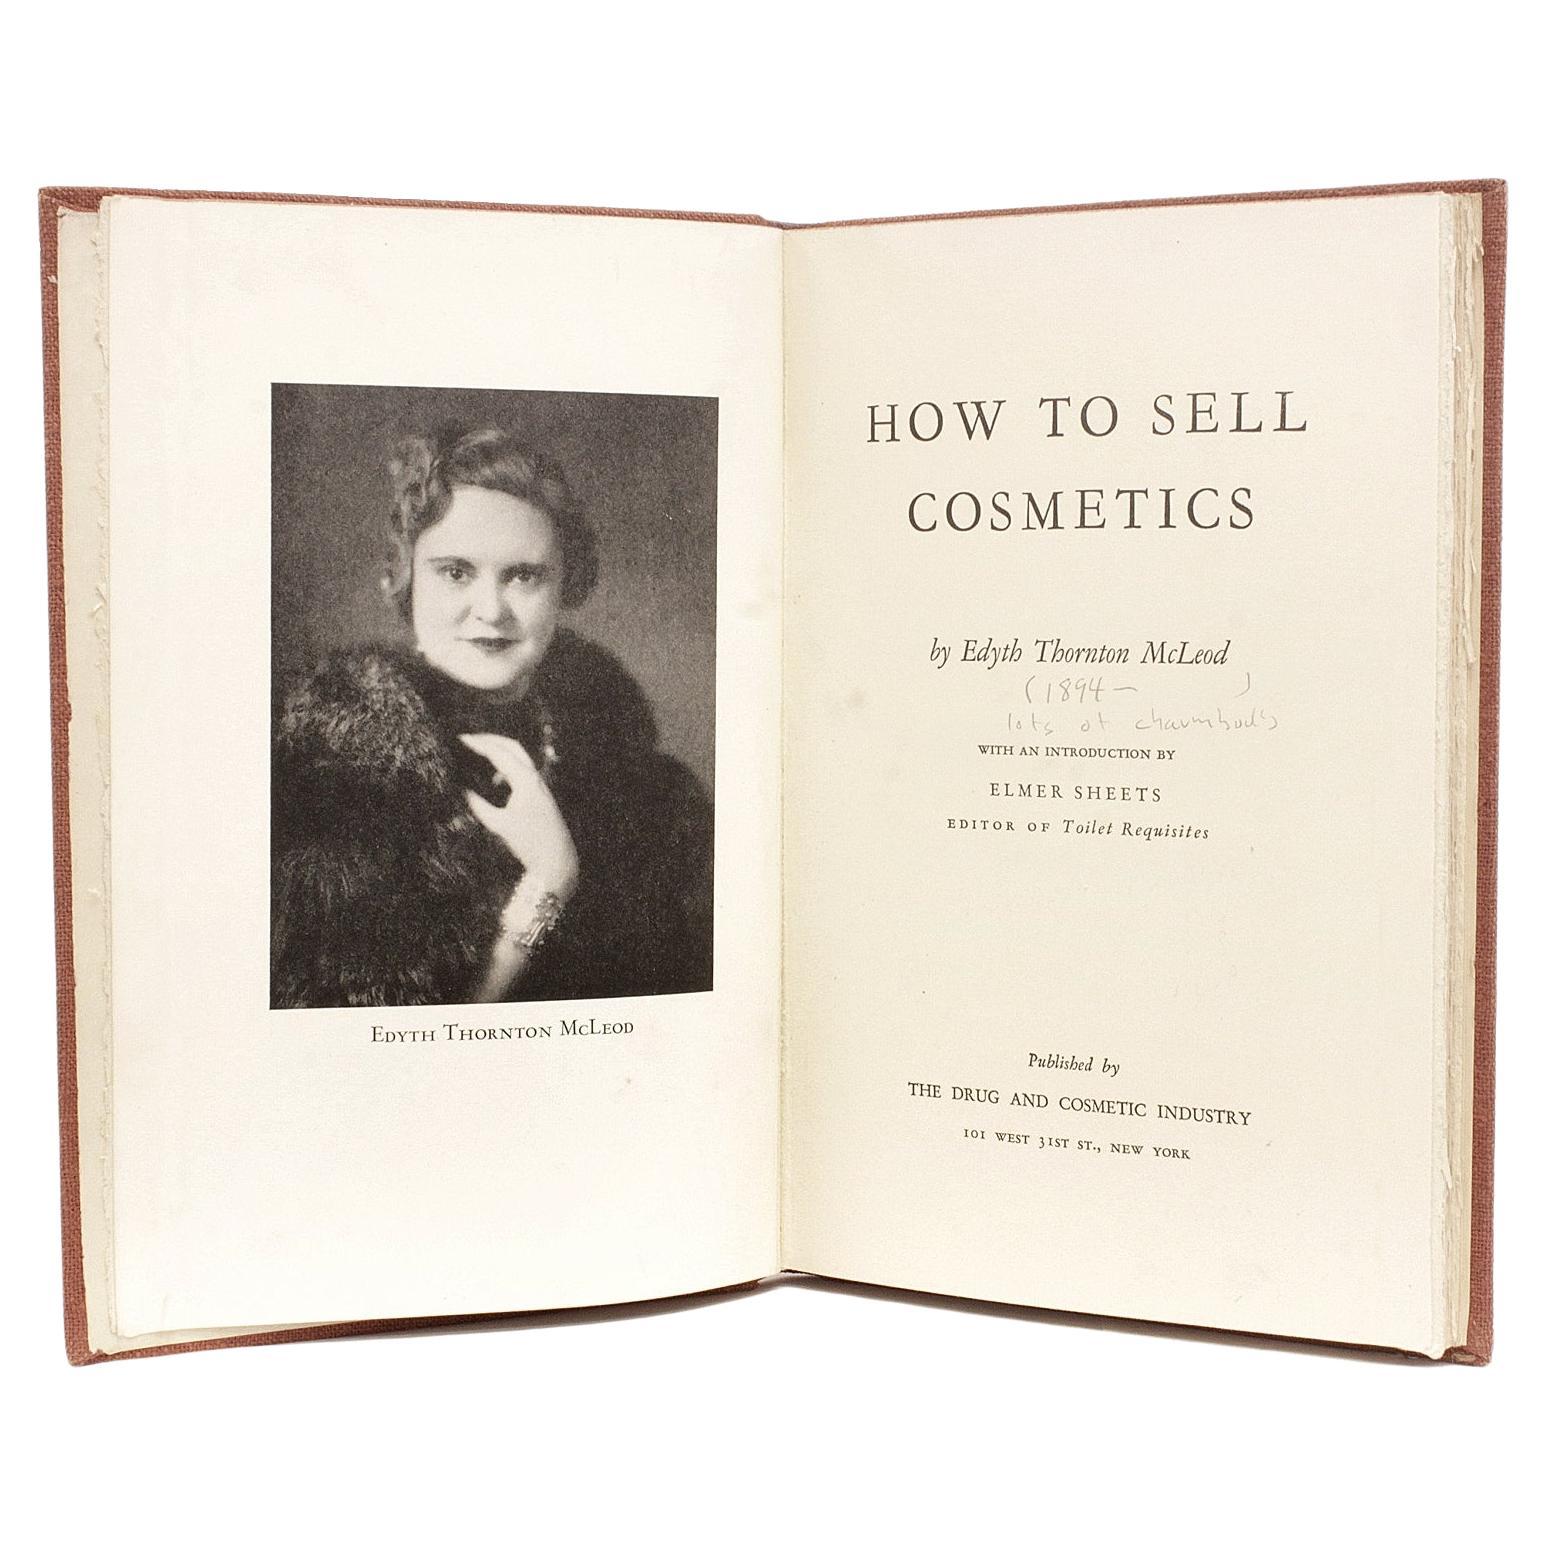 McLeod, Edyth Thornton, How to Sell Cosmetics, première édition, inscrite, 1937